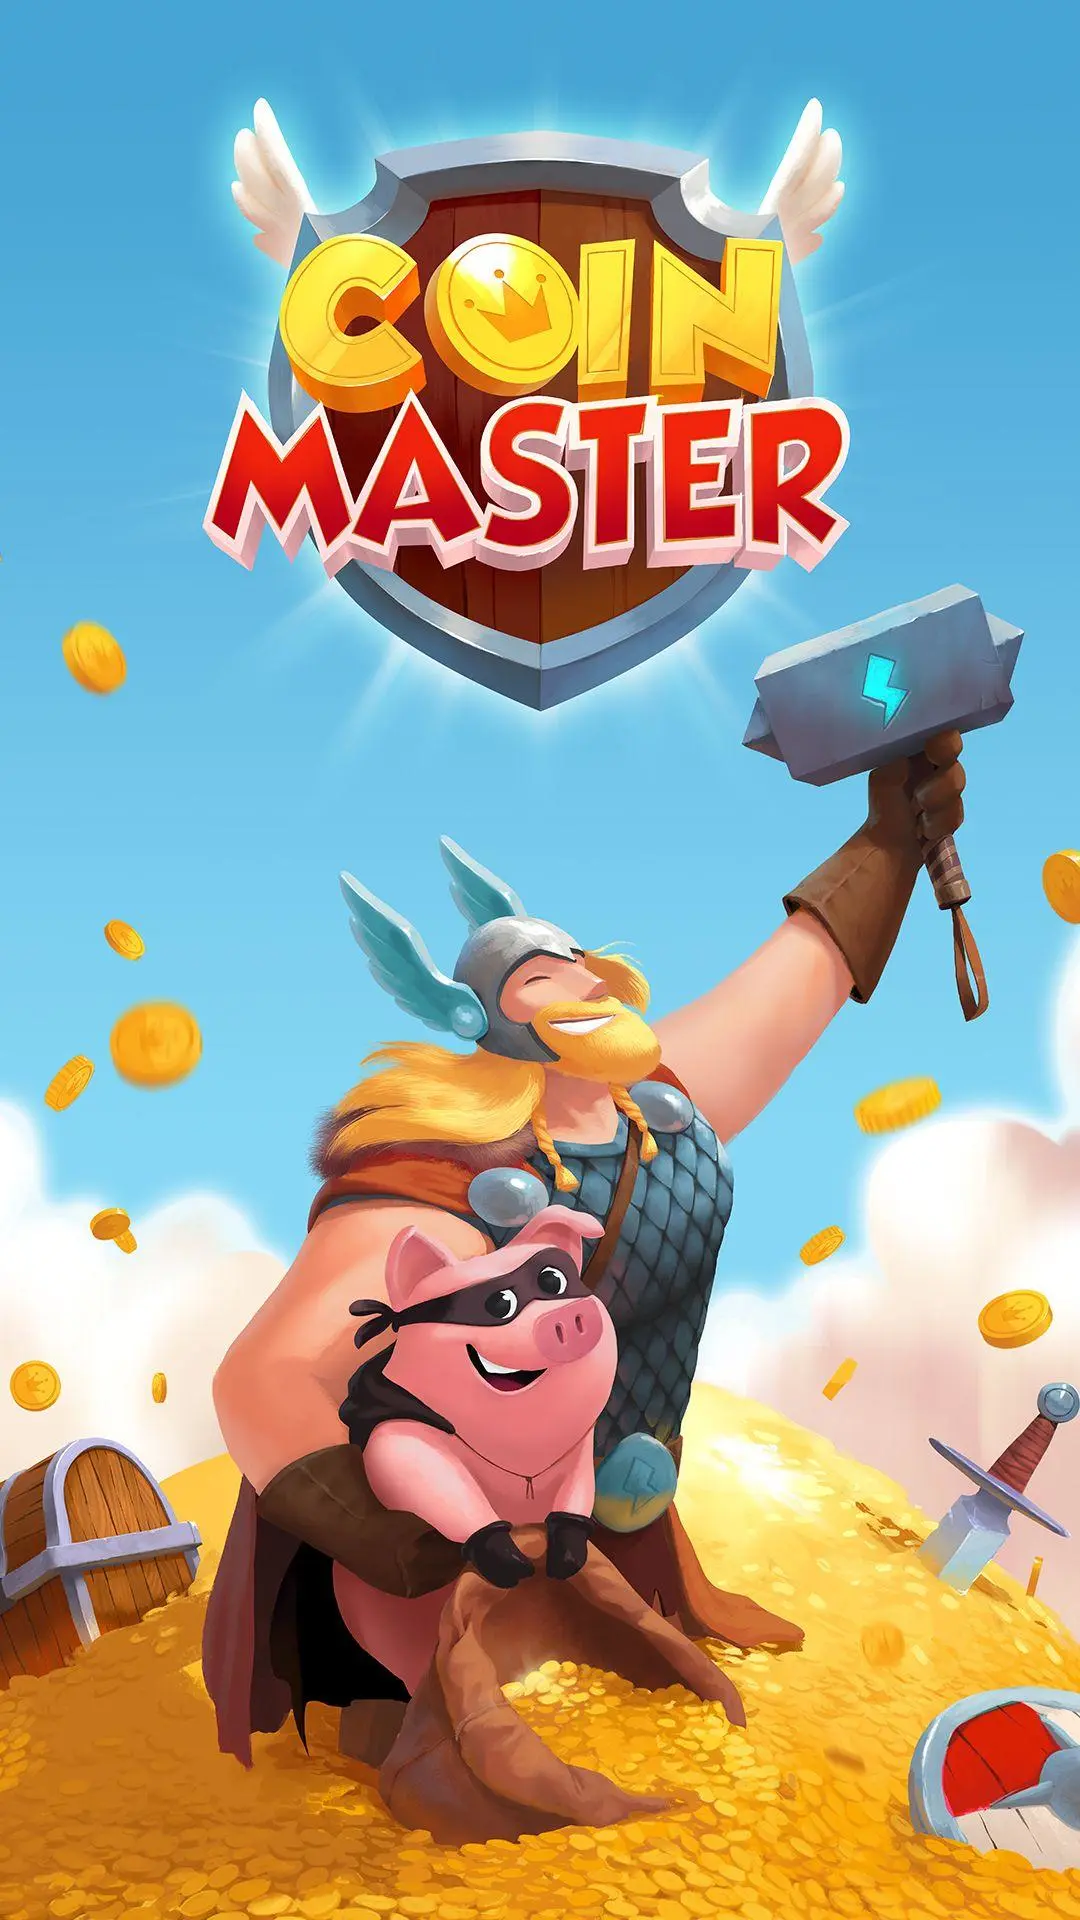 Download Coin Master: Farm Seasons AppX File for Windows Phone - Appx4Fun